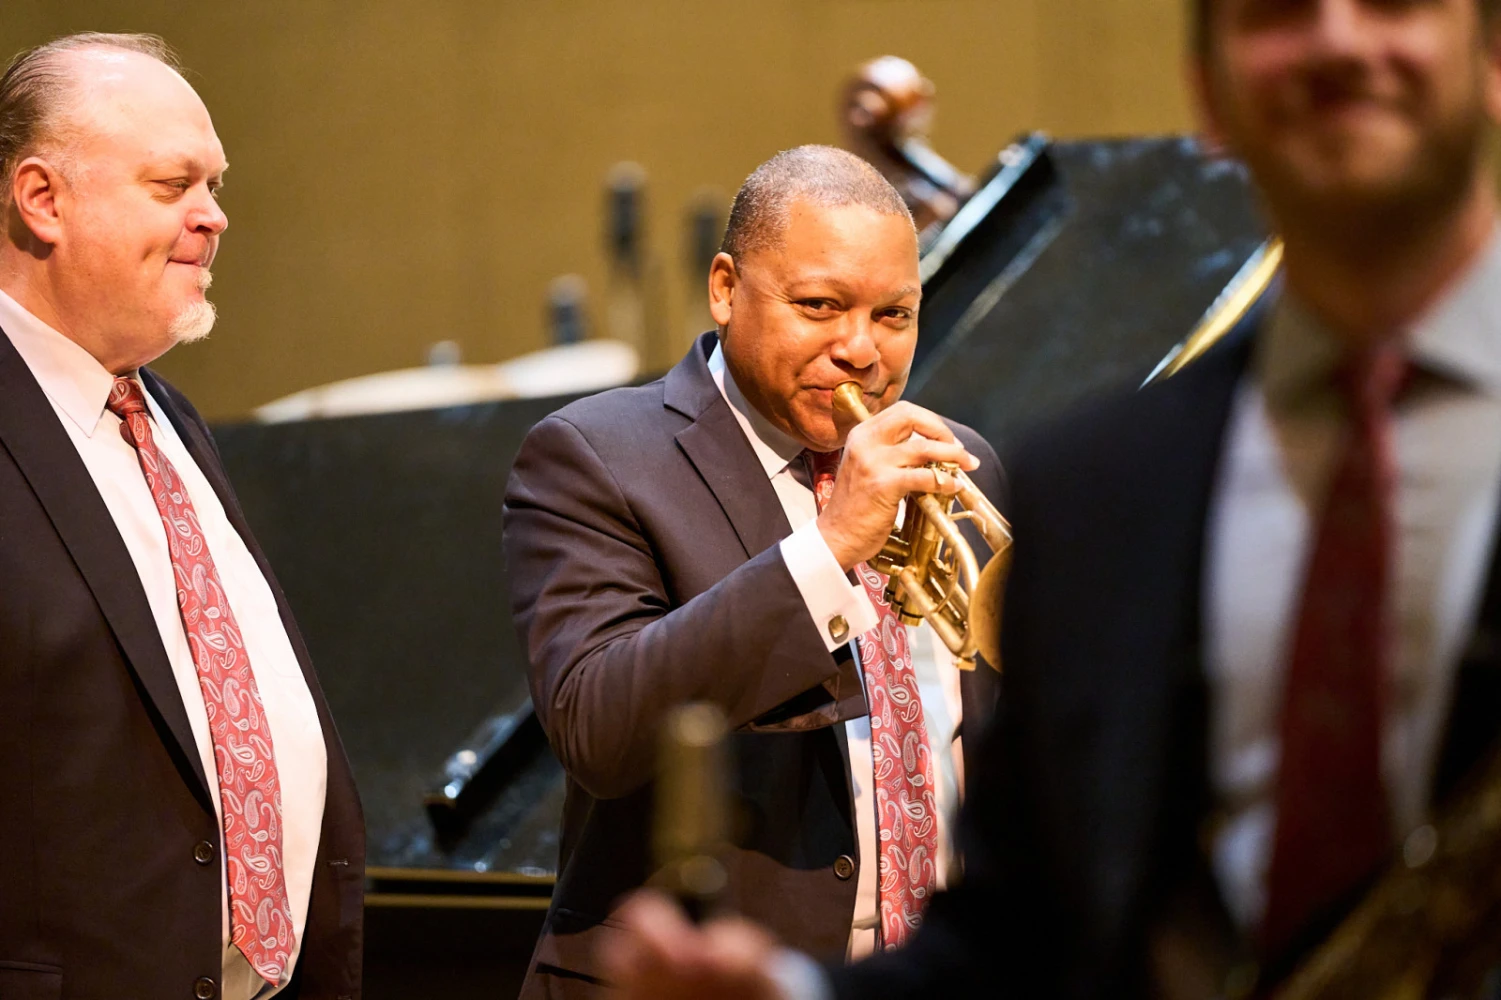 Celebrity Series presents Jazz at Lincoln Center Orchestra with Wynton Marsalis: What to expect - 3